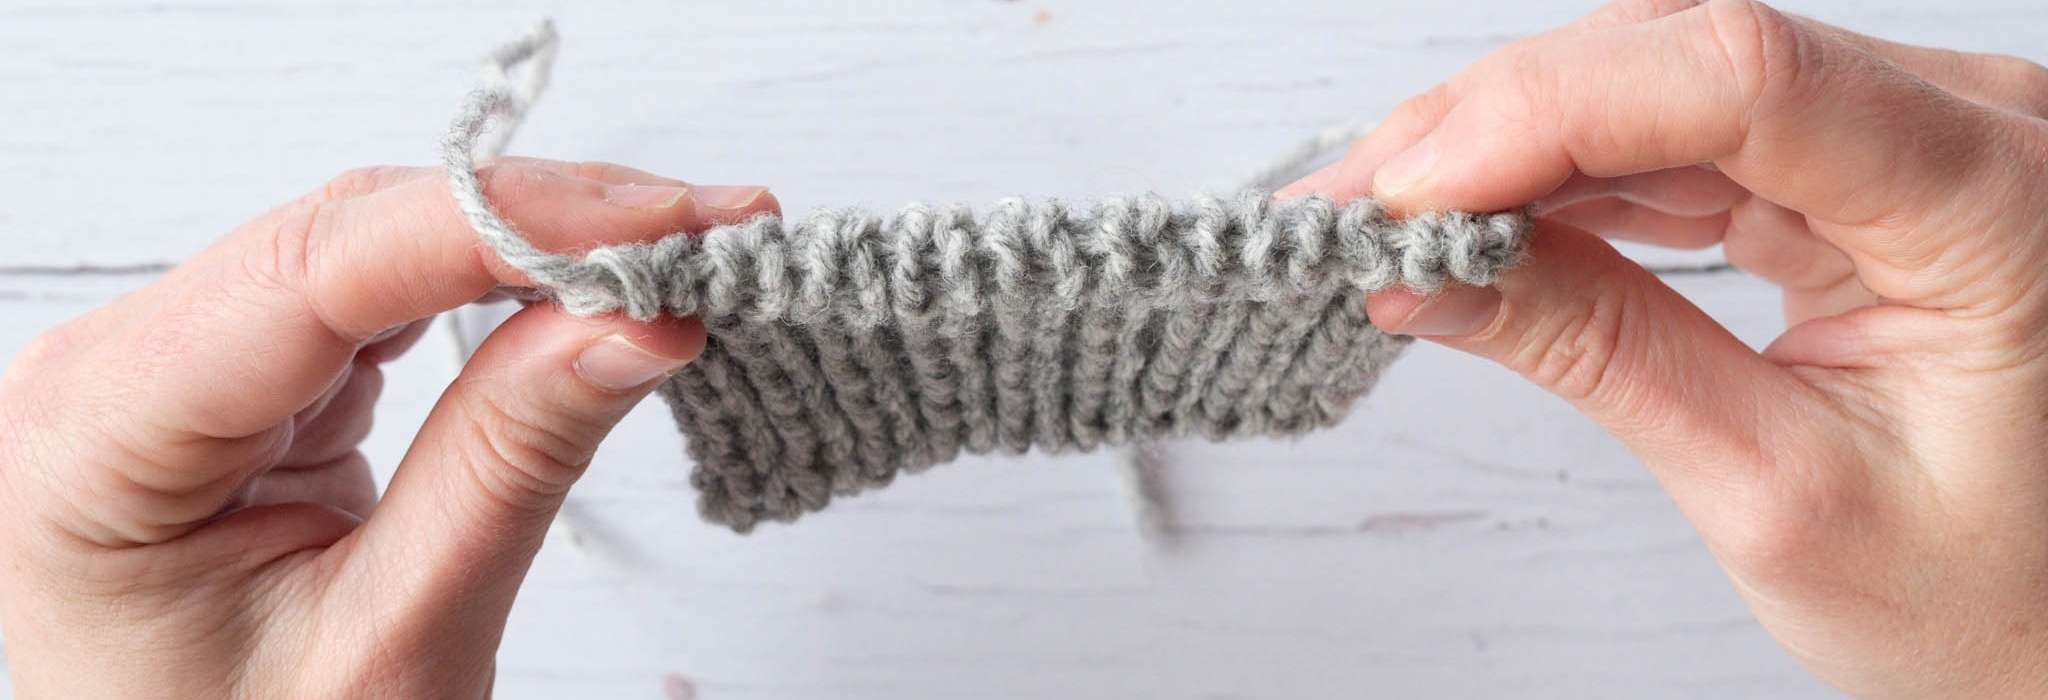 Stretchy Bind-Off Knitting: How to Do the Decrease Bind-Off